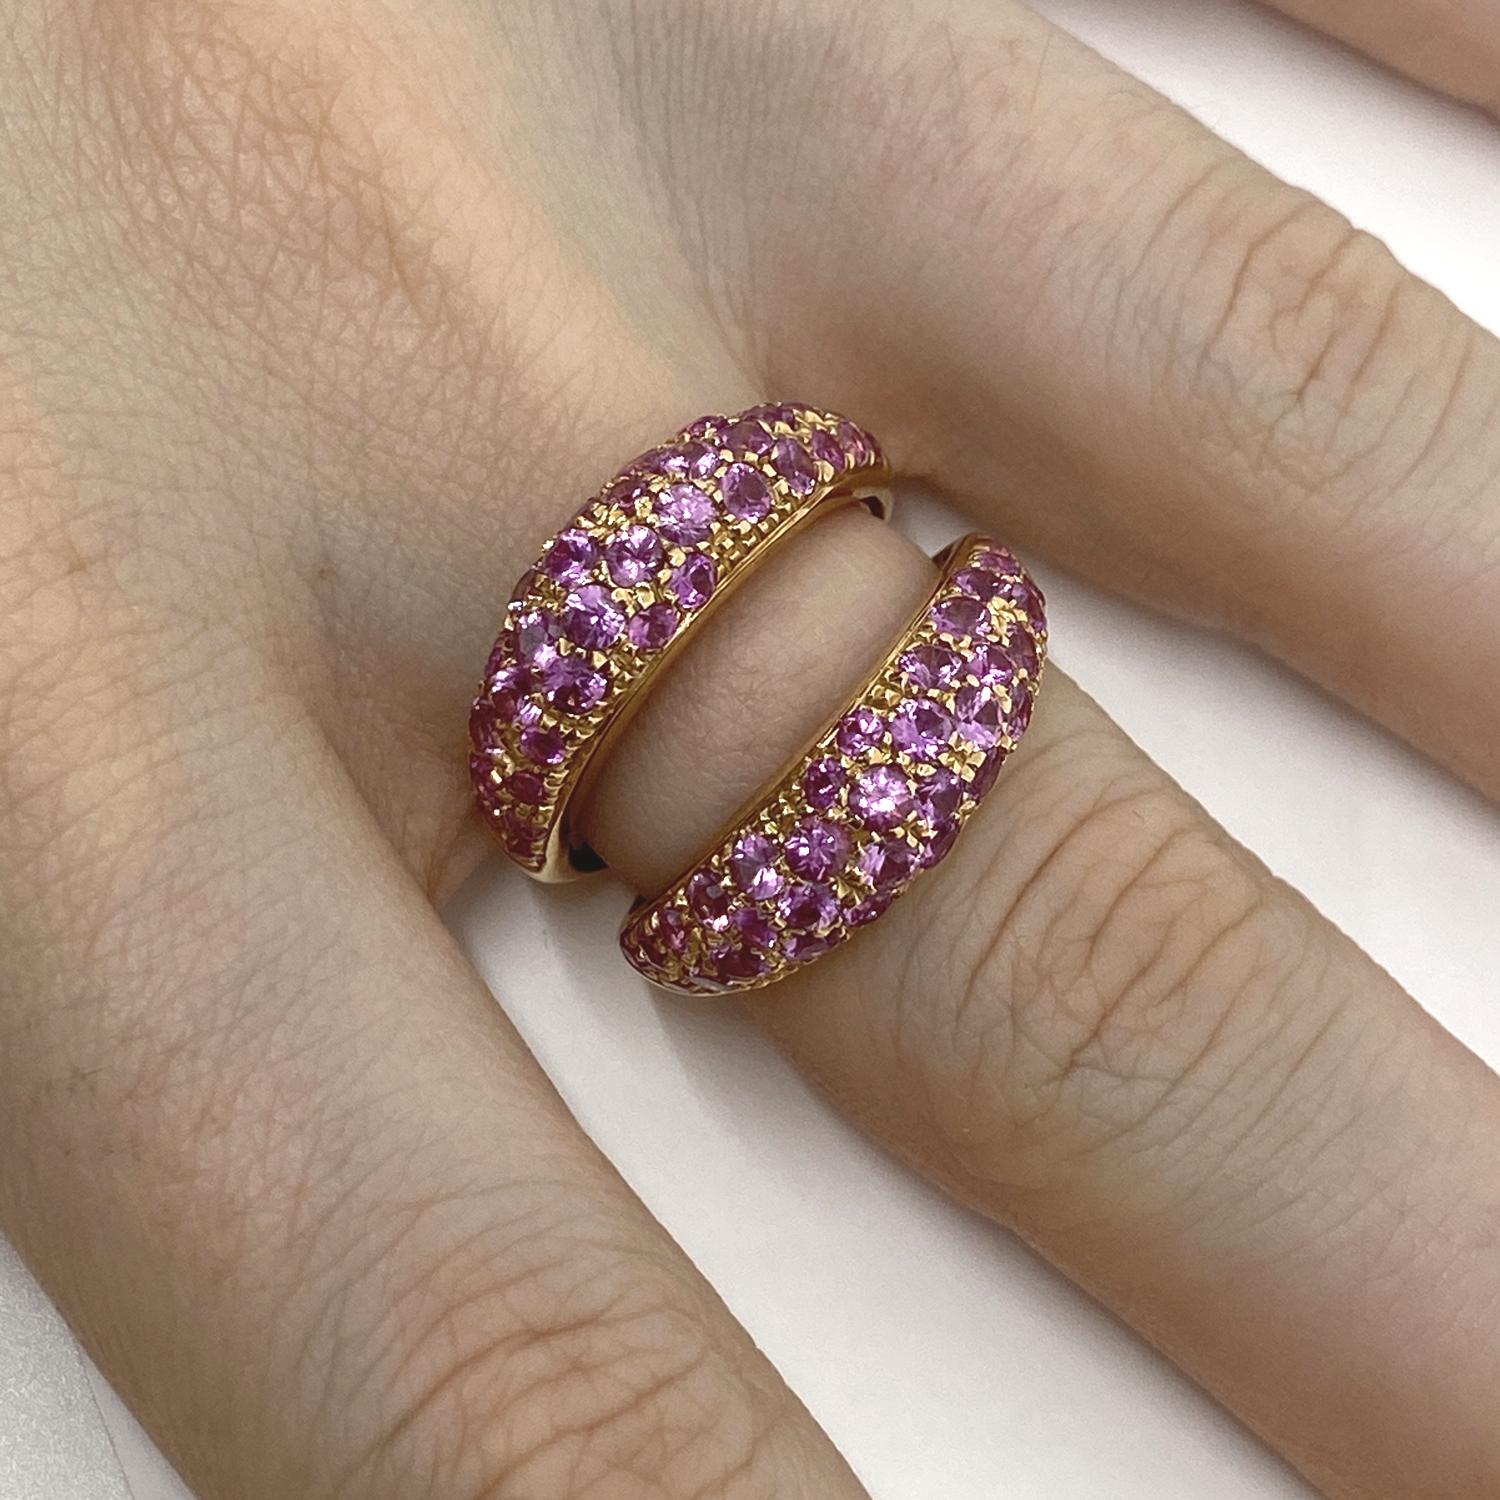 Ring made of 18 kt rose gold with natural brilliant-cut pink sapphires for ct 3.40 

Welcome to our jewelry collection, where every piece tells a story of timeless elegance and unparalleled craftsmanship. As a family-run business in Italy for over